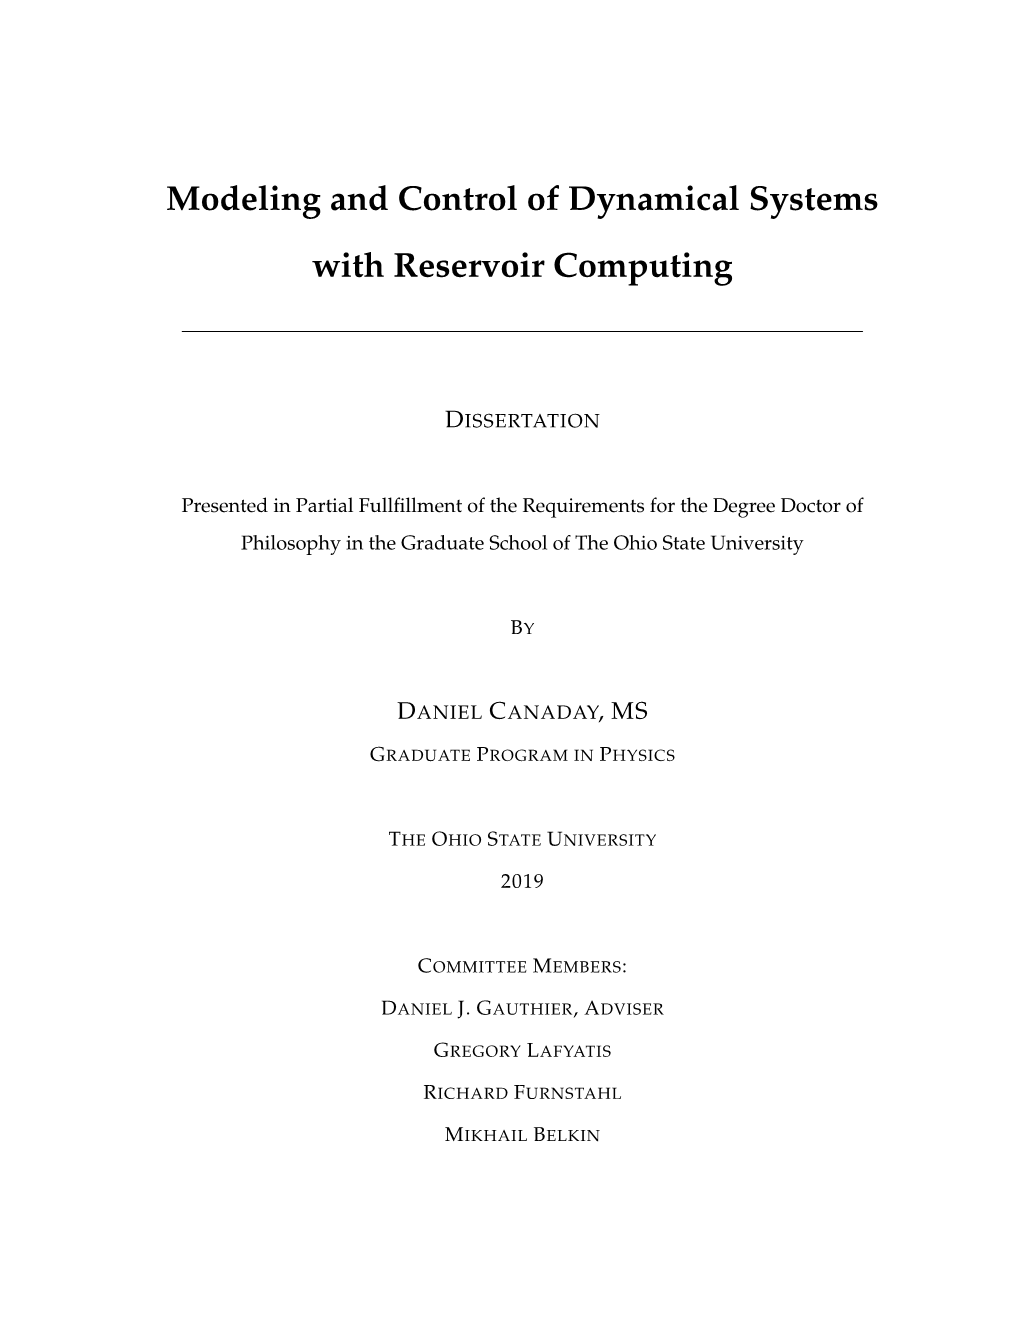 Modeling and Control of Dynamical Systems with Reservoir Computing